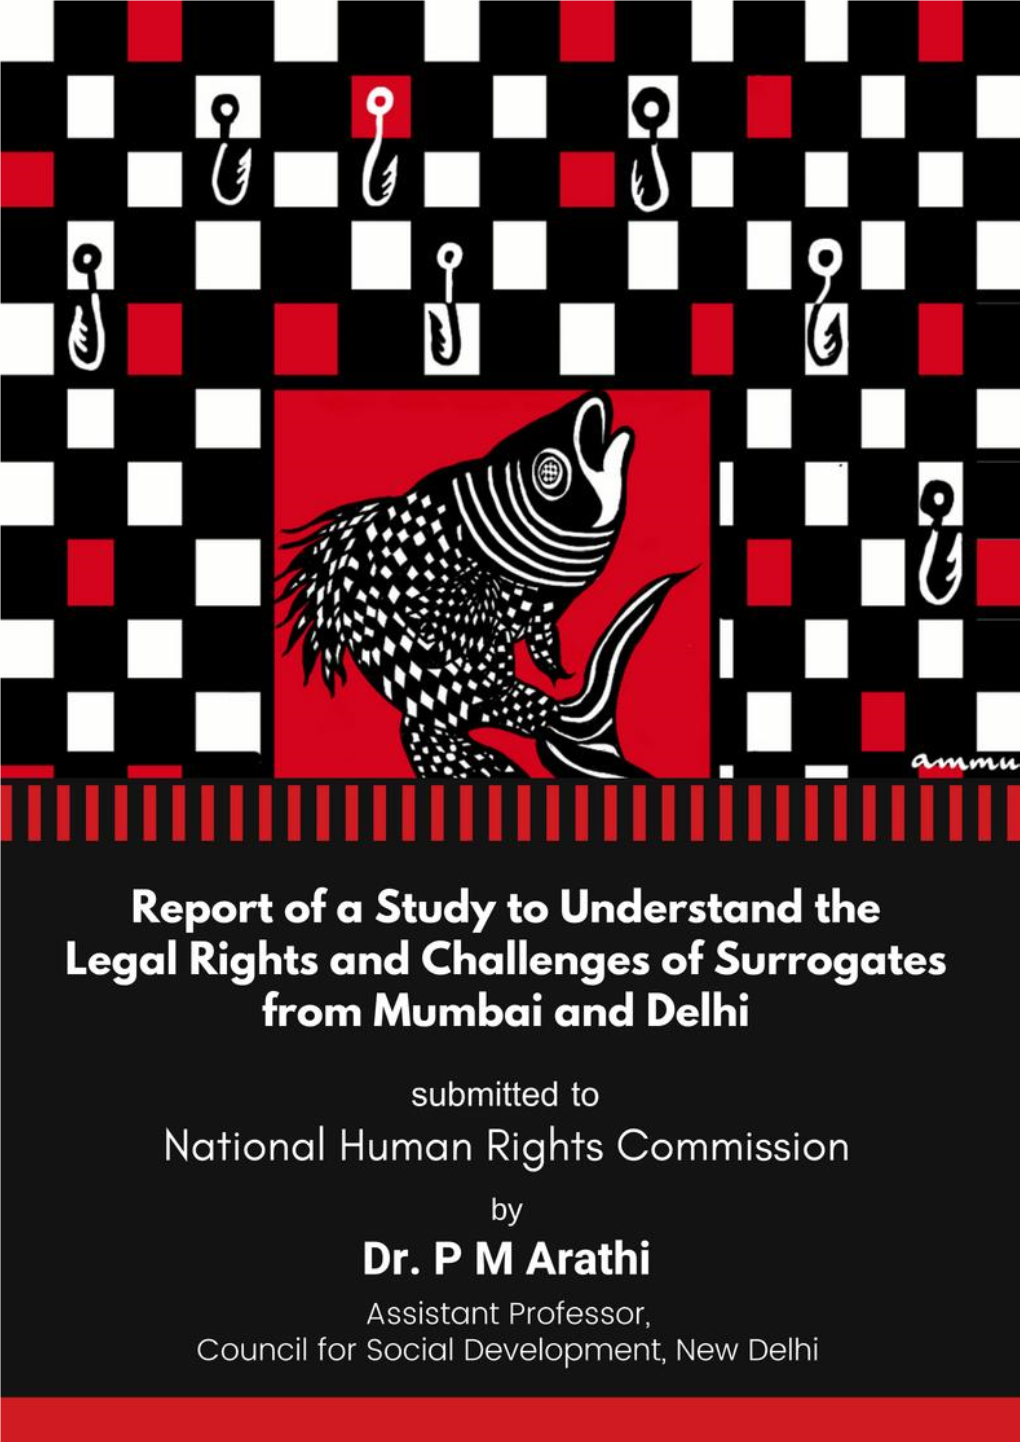 A Study to Understand the Legal Rights and Challenges of Surrogates from Mumbai and Delhi